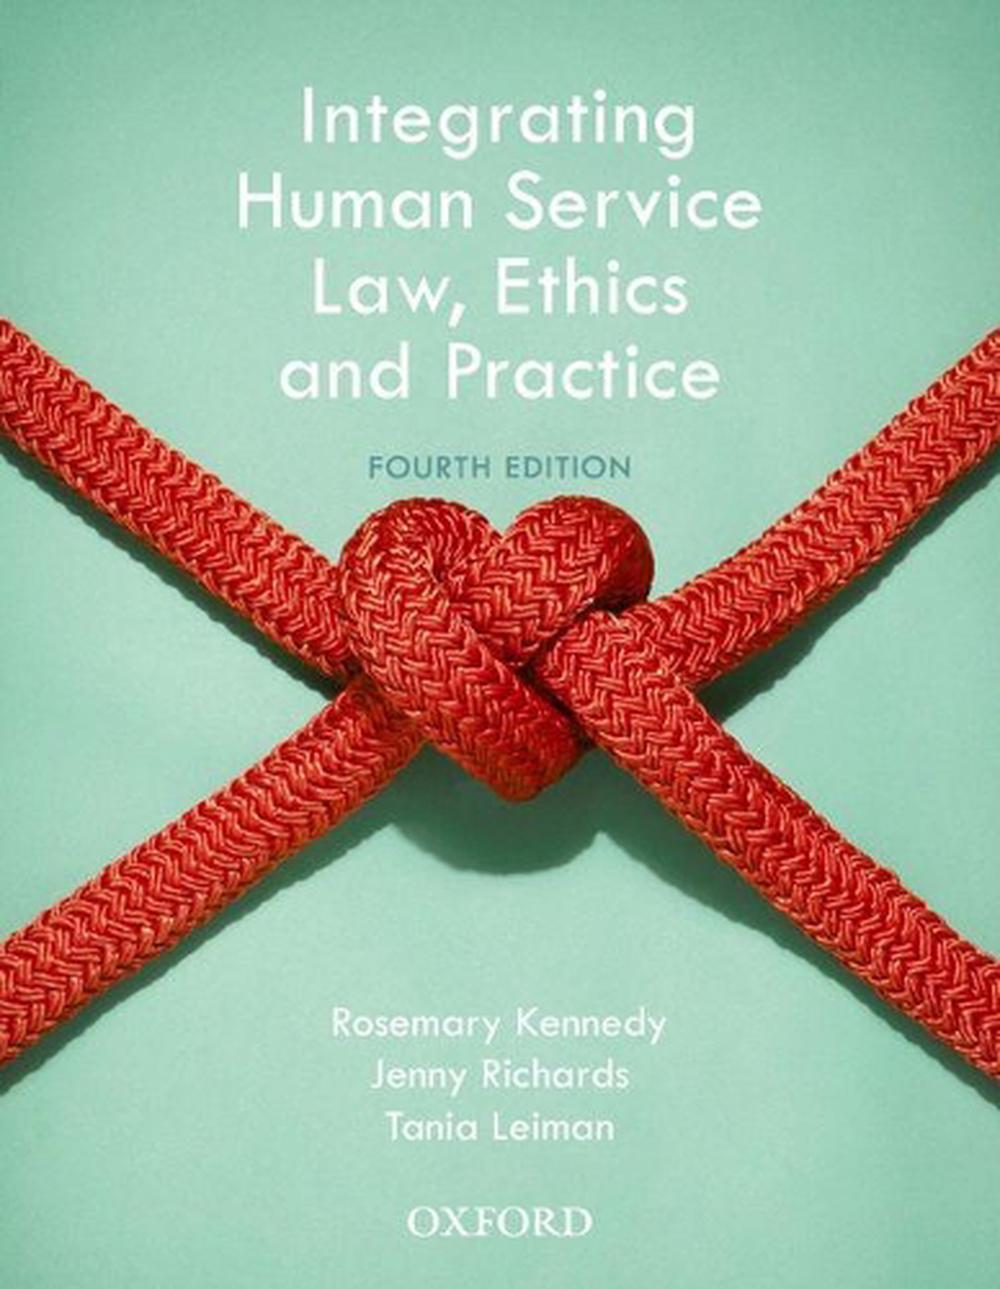 Integrating Human Service Law, Ethics and Practice, 4th Edition by Rosemary Kennedy, Paperback